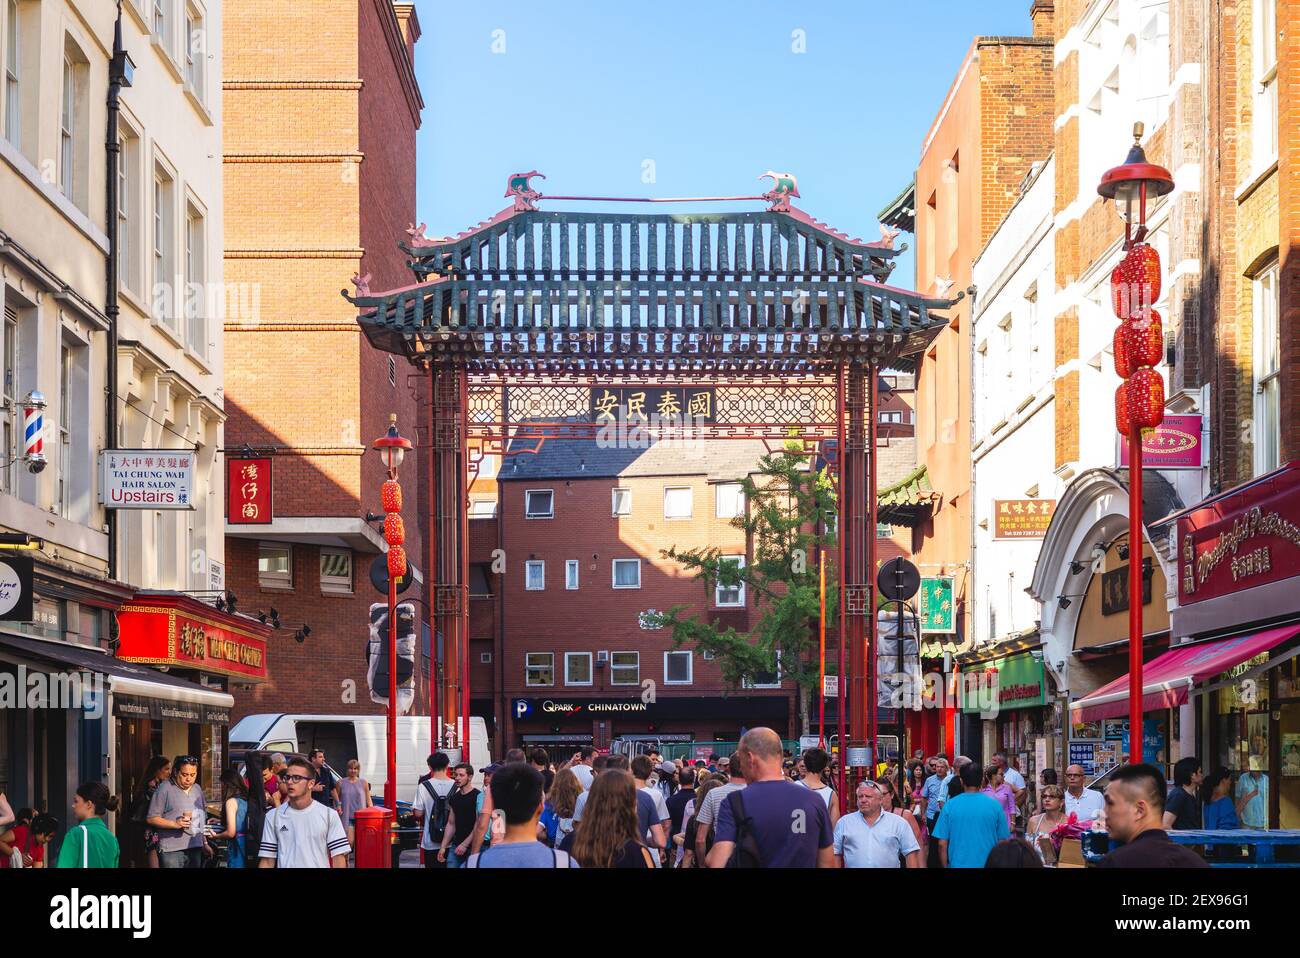 July 1, 2018: Chinatown, an ethnic enclave in the City of Westminster, London, UK.  It contains a number of Chinese restaurants, bakeries, supermarket Stock Photo